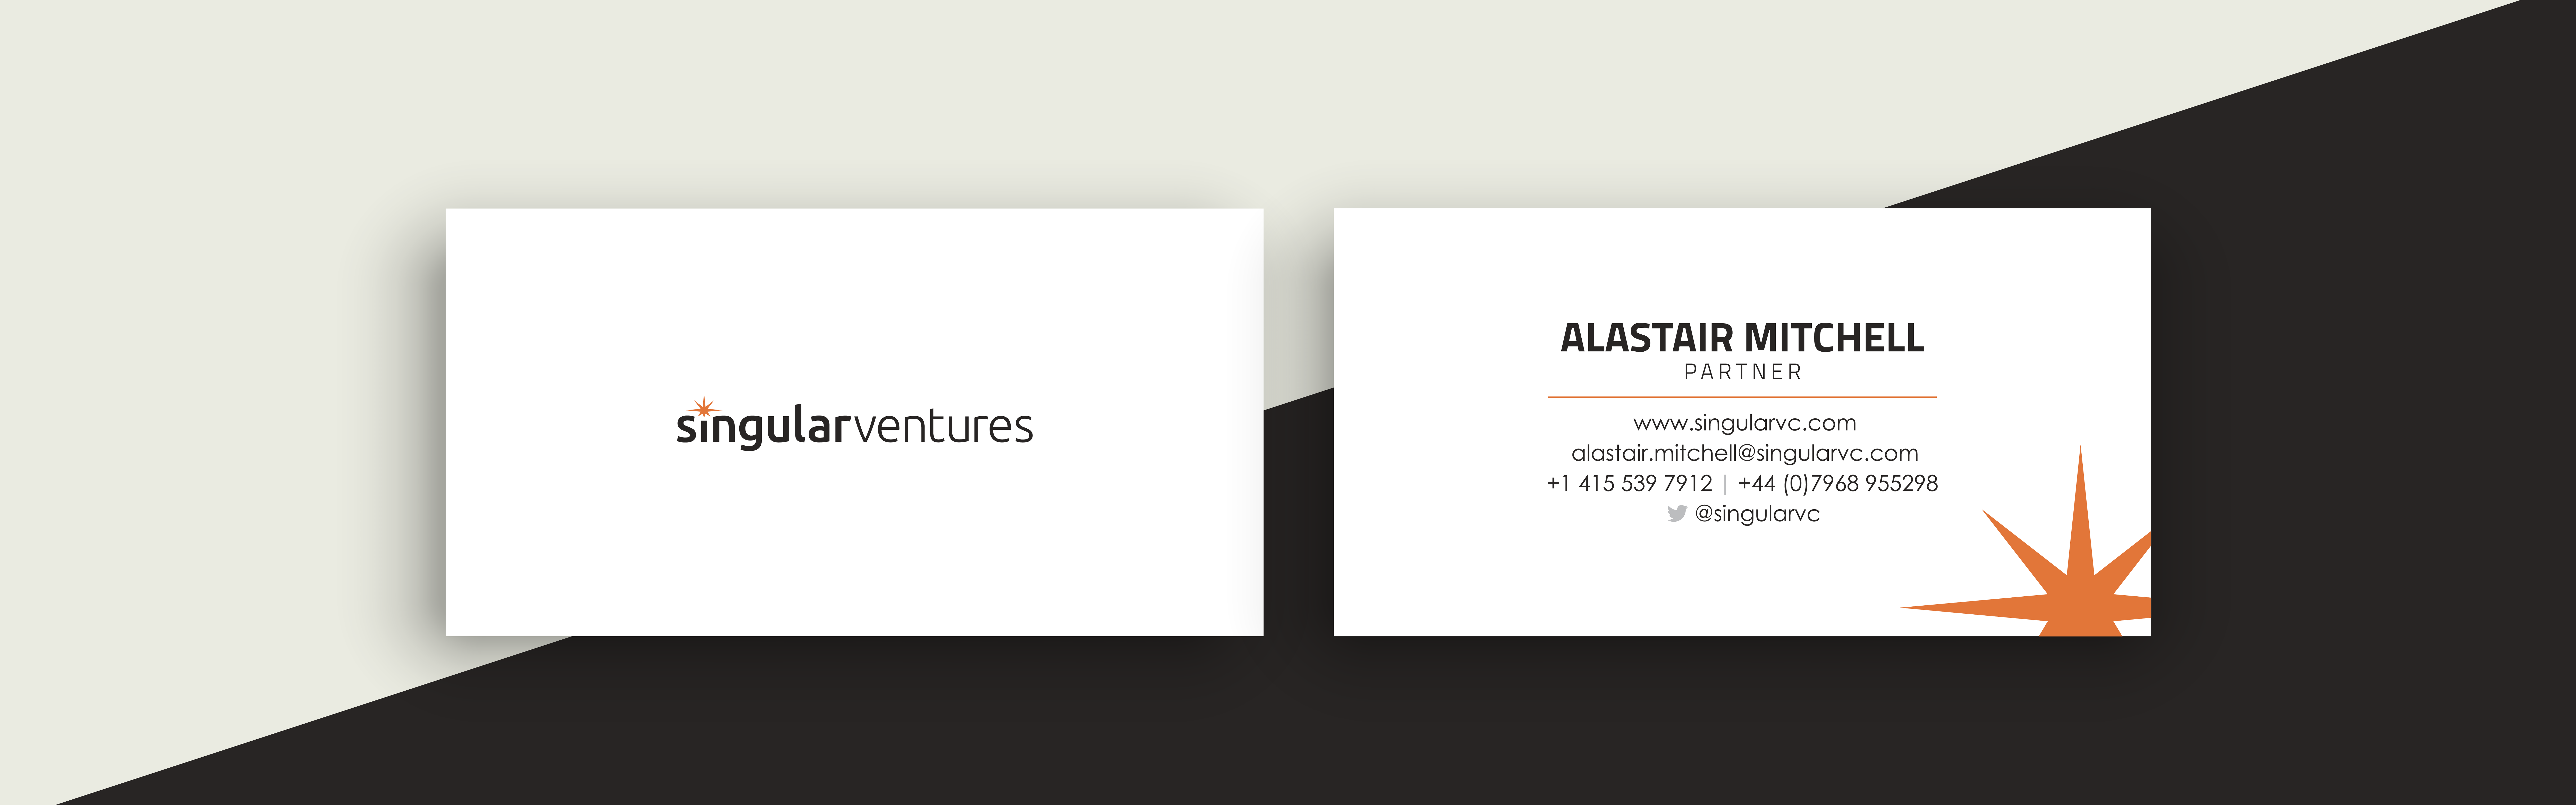 Two business cards are displayed, one showcasing a logo for "Singular Ventures" and the other providing contact information for Alastair Mitchell, a partner at the firm, including phone number, email,